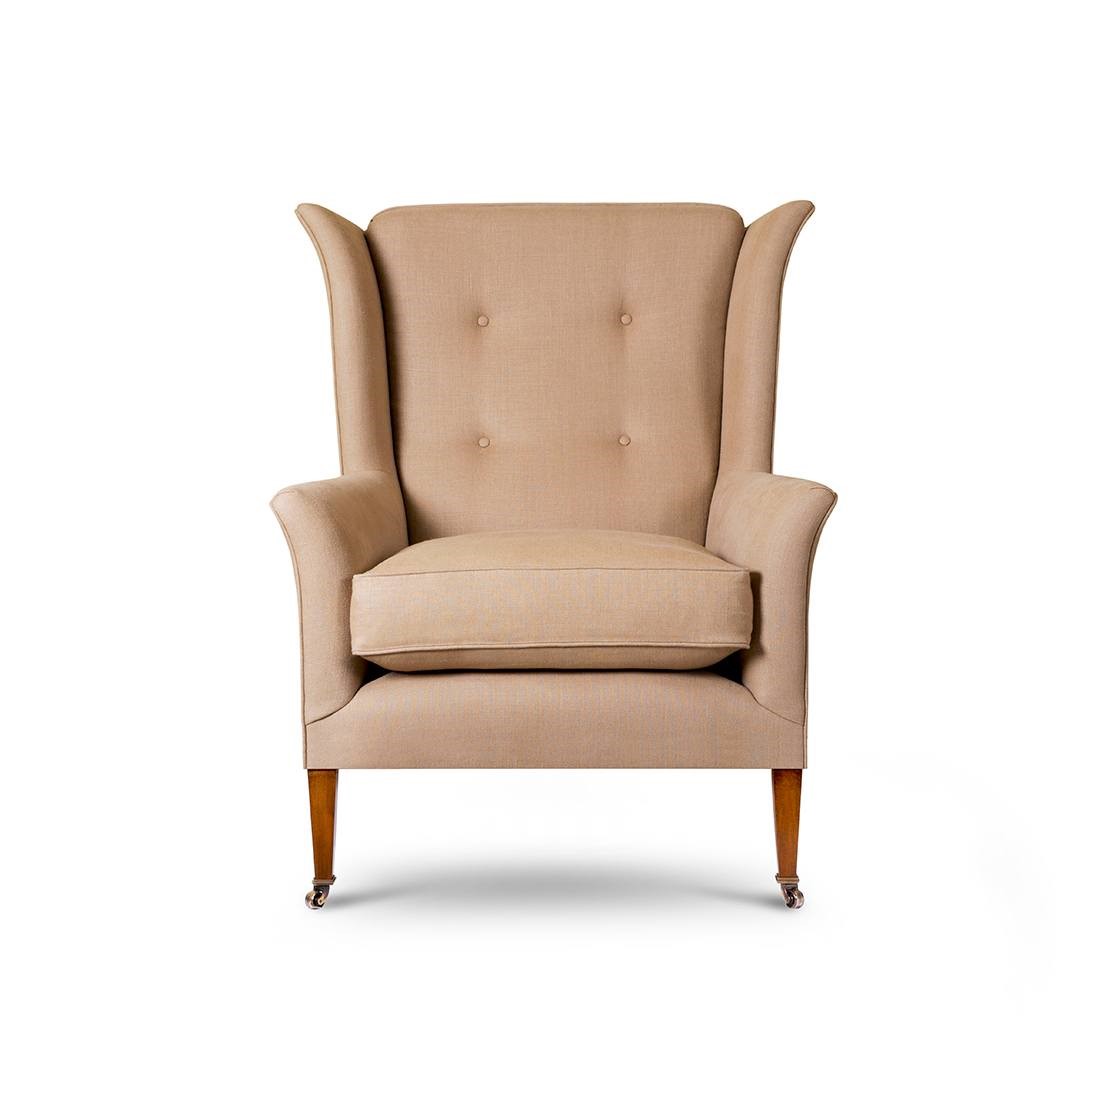 Theodore Armchair by Beaumont & Fletcher